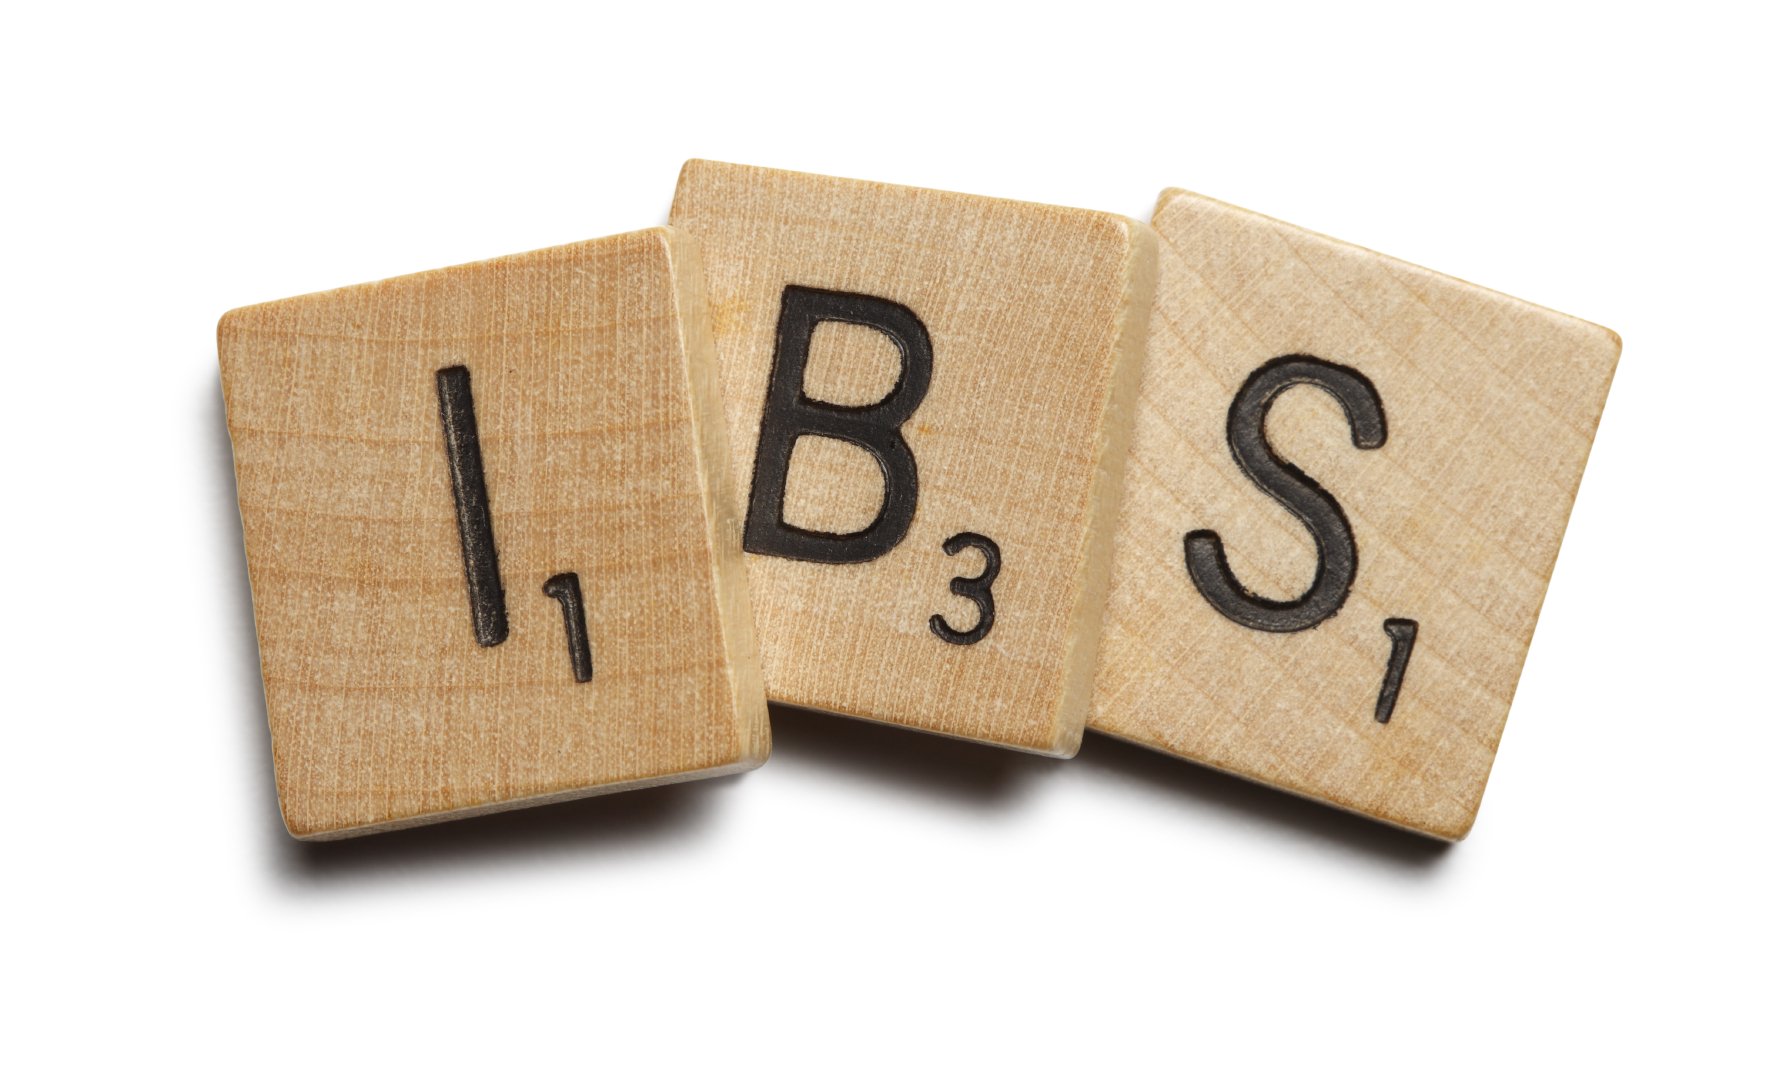 Wooden scrabble tiles spelling "IBS" - for editorial use only